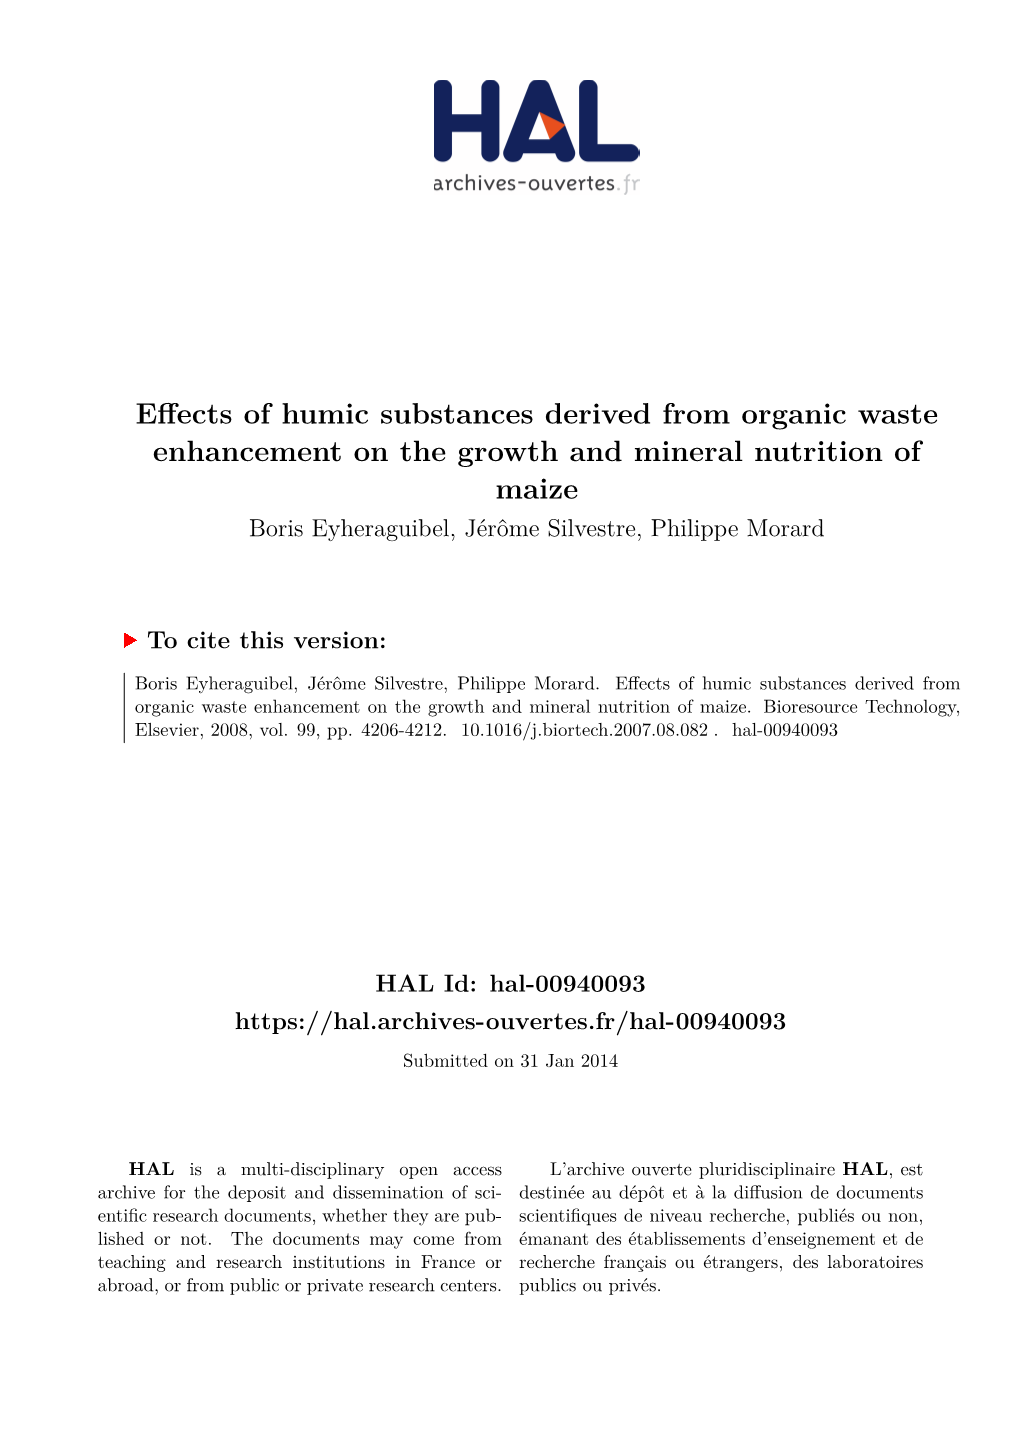 Effects of Humic Substances Derived from Organic Waste Enhancement on the Growth and Mineral Nutrition of Maize Boris Eyheraguibel, Jérôme Silvestre, Philippe Morard